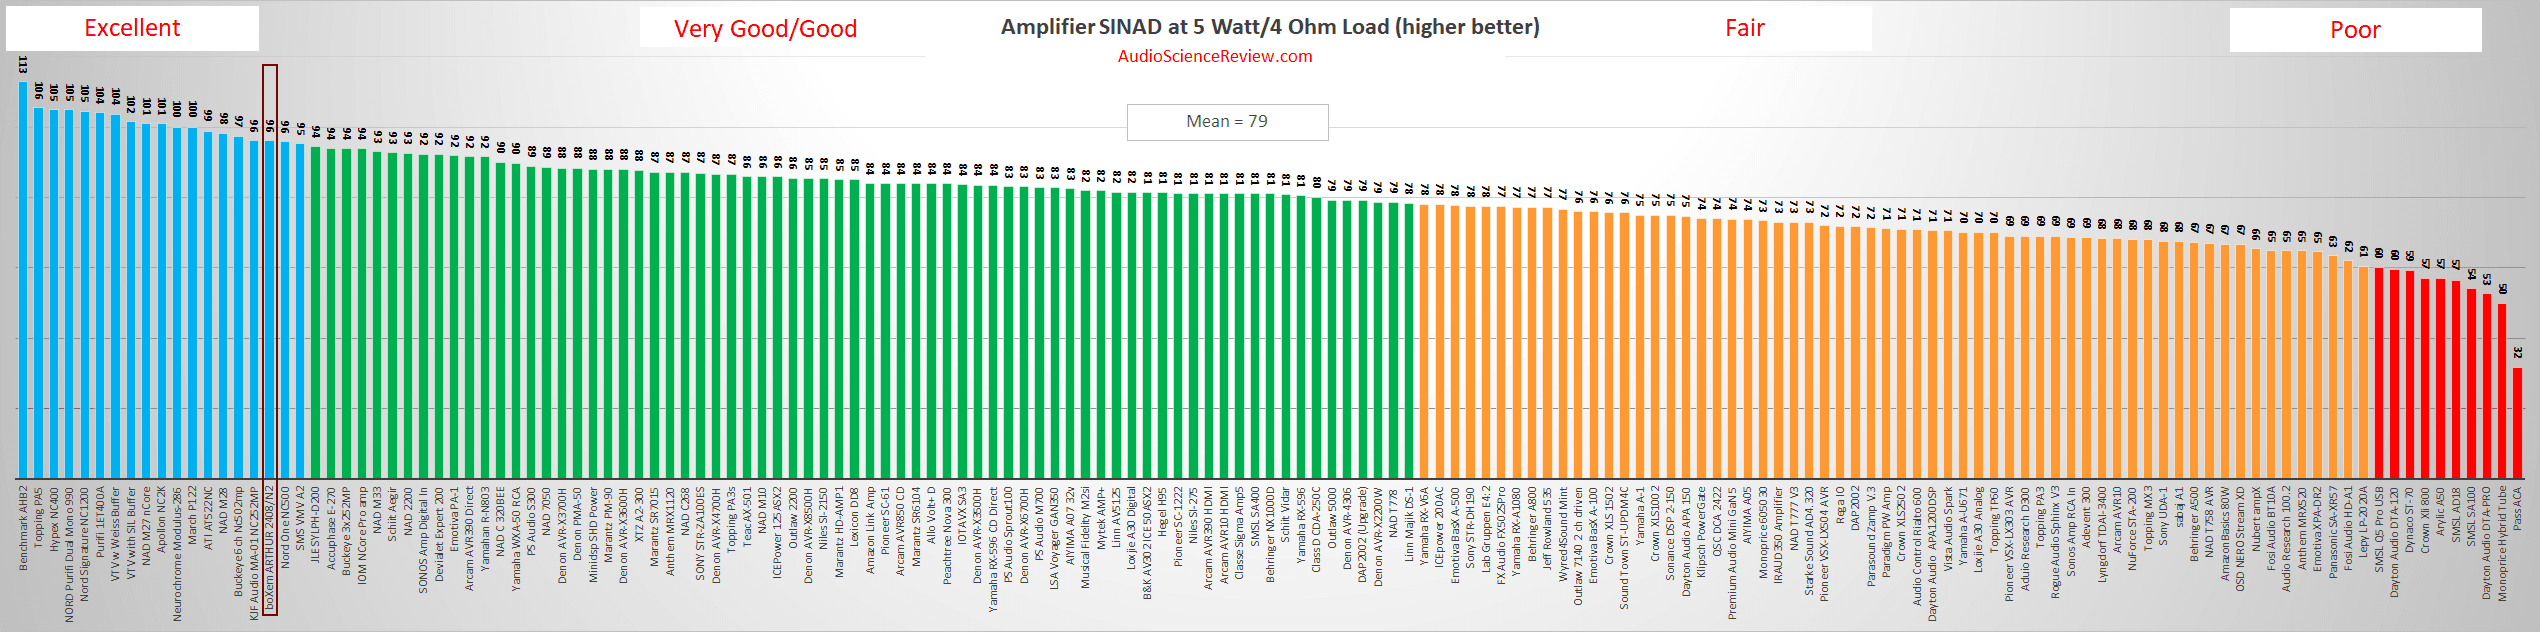 Top 20 stereo amplifier review.png